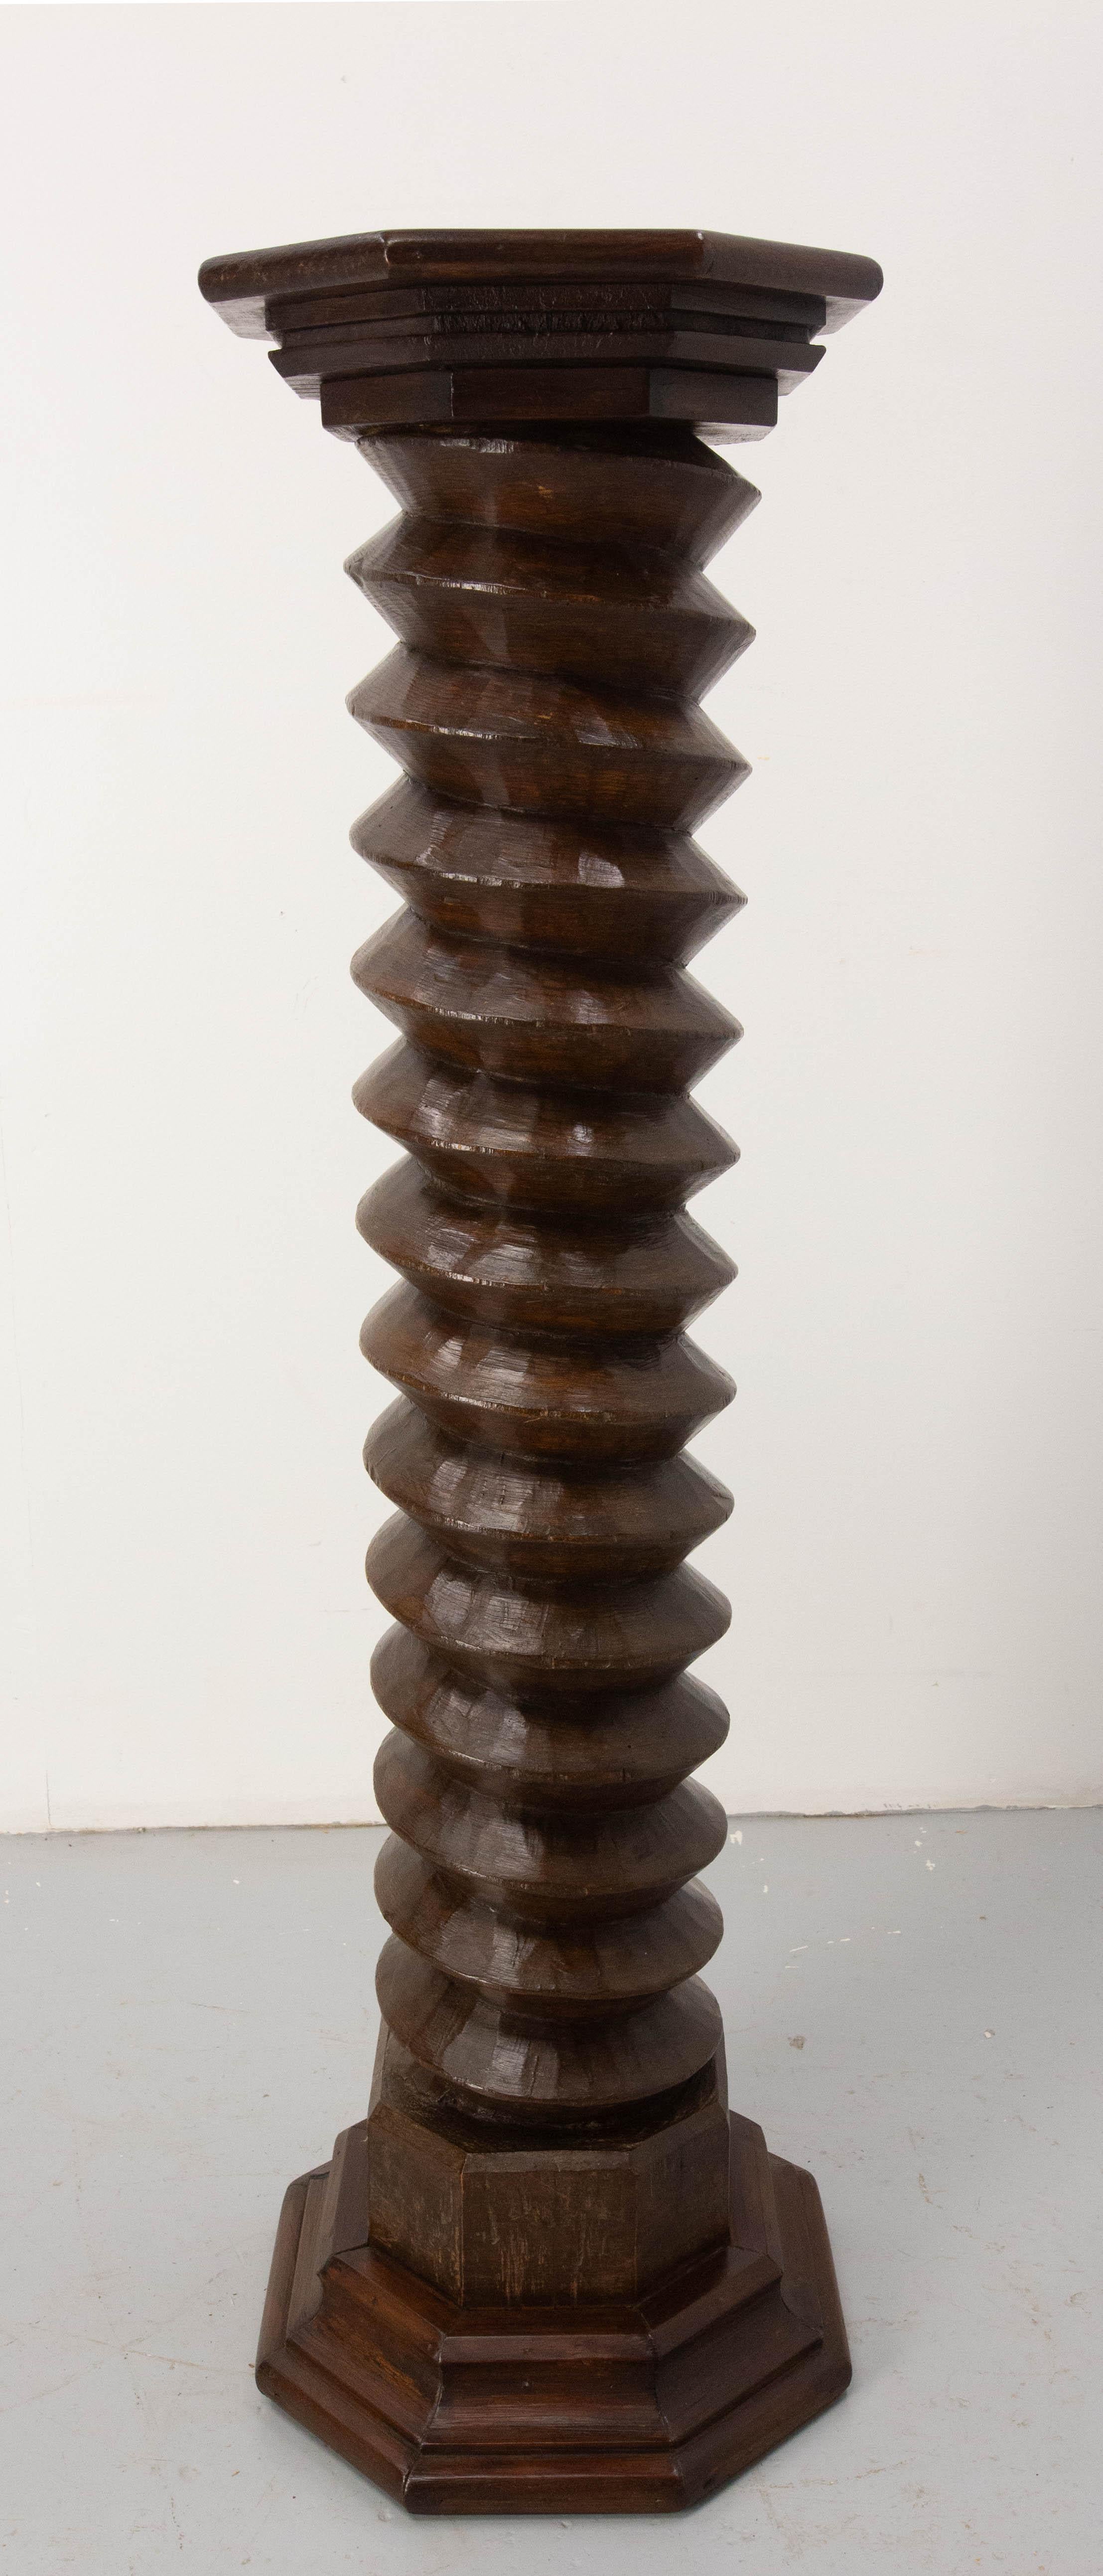 French pedestal wine press screw, 19th century.
Brutalist style with octogonal base and top.
Dimension of the base : 13.39 in. x 13.39 in. (34 x 34 cm)
Dimension of the top : 11.81 in. x 11.81 in. (30 x 30 cm)
Good antique condition
Solid and